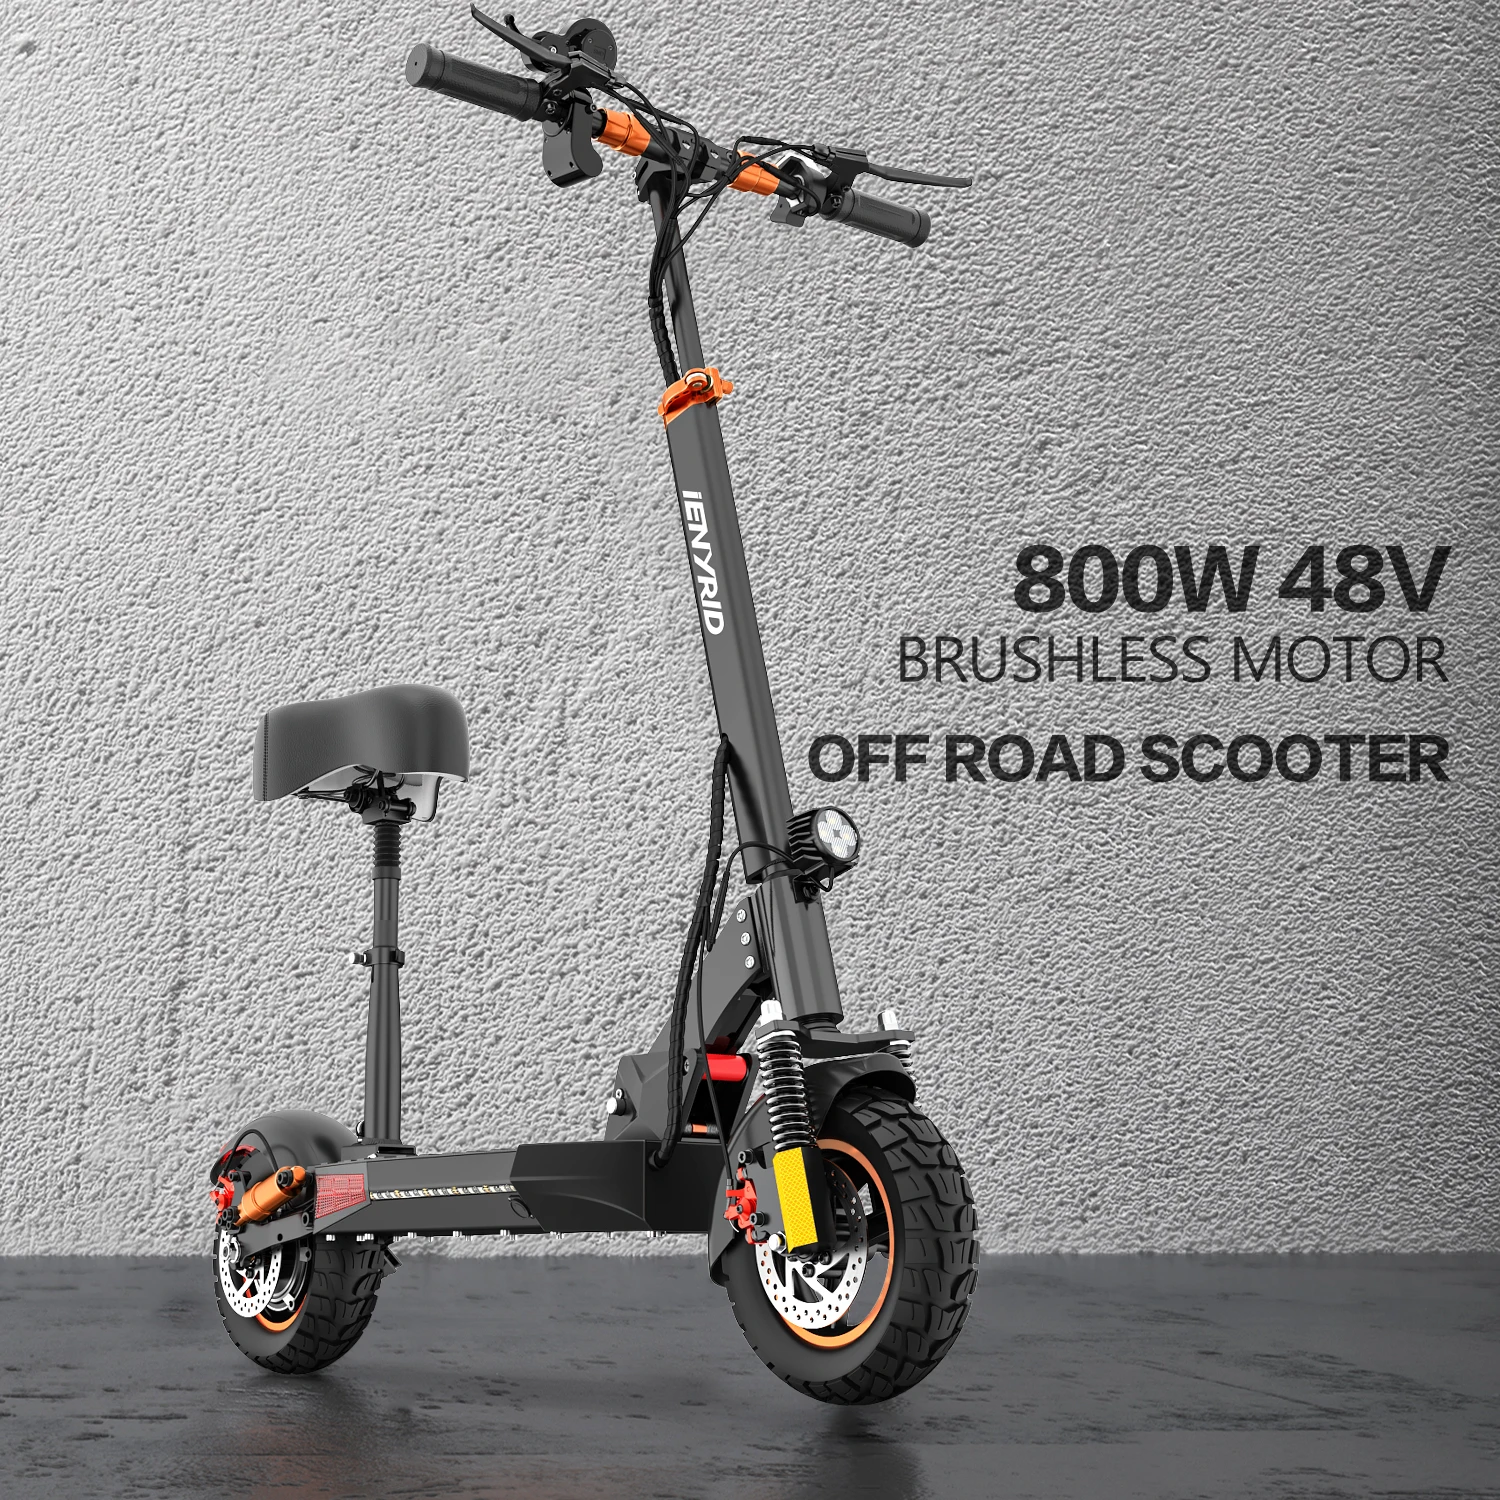 

UK USA Warehouse wholesale iENYRID M4 Pro S+ scooter electric motorcycle 48V 800W 45km/h folding electric mobility scooter